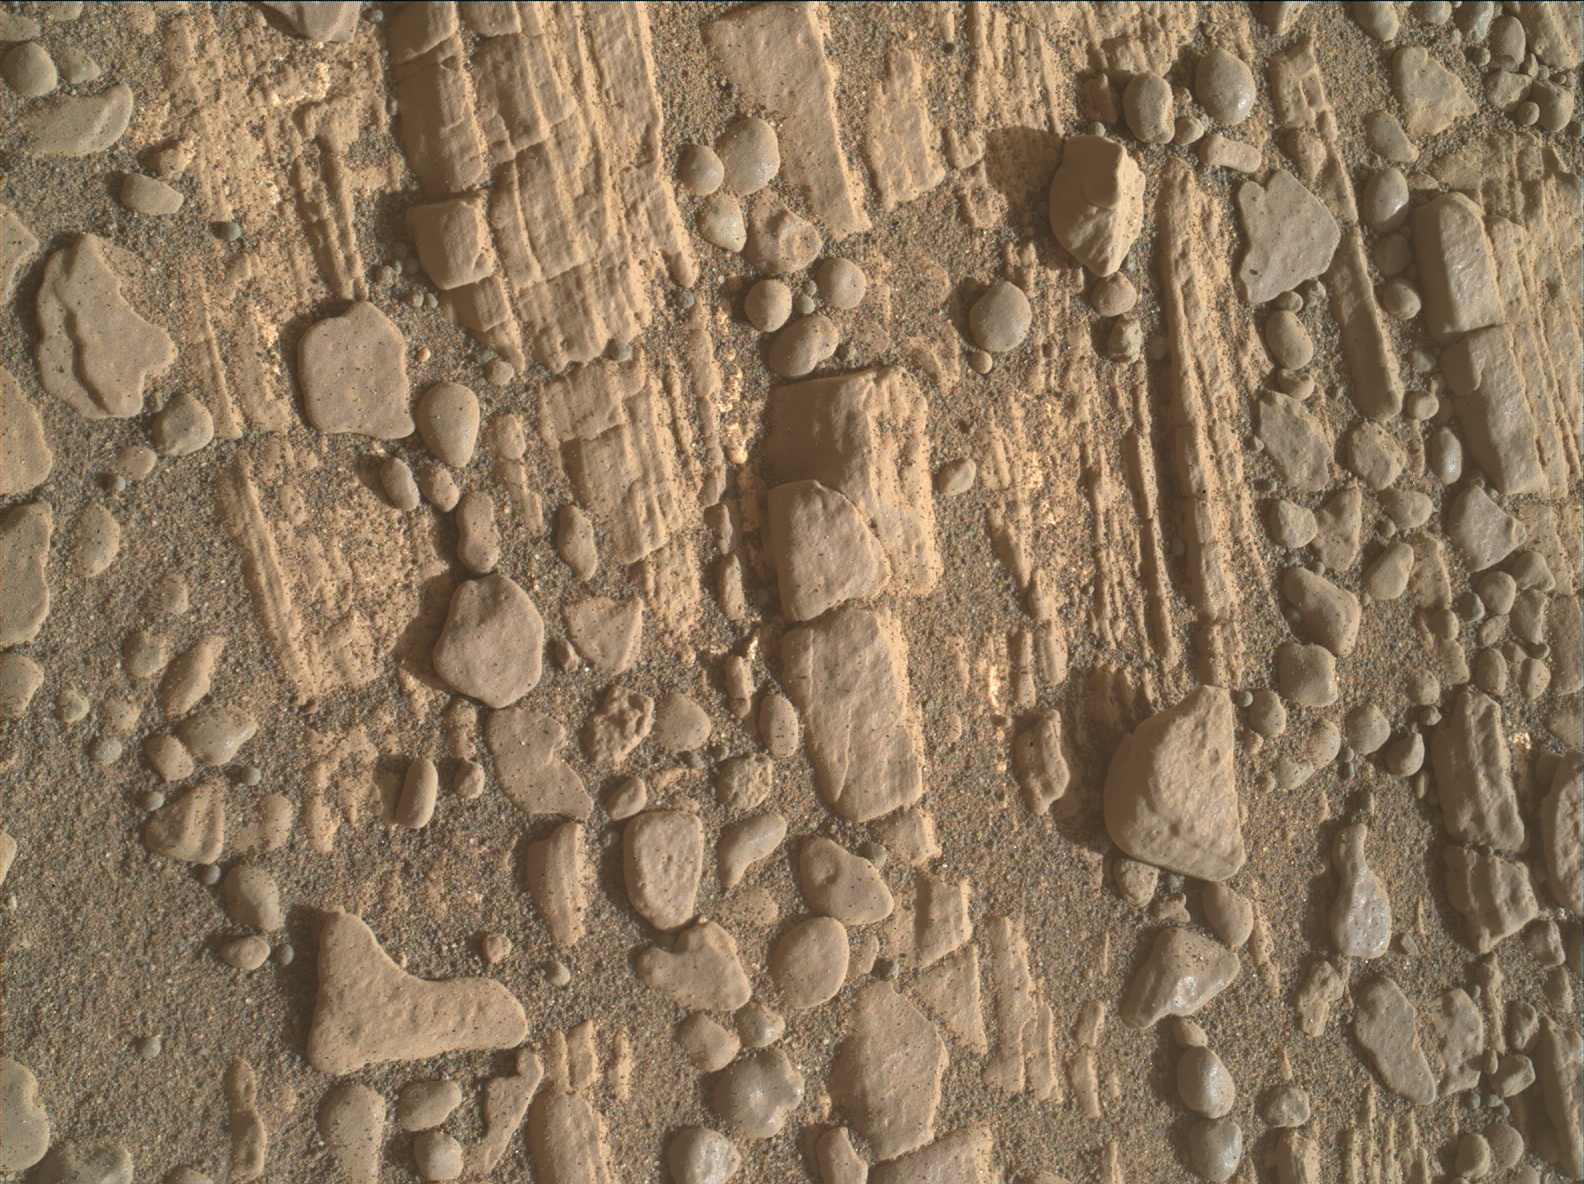 Nasa's Mars rover Curiosity acquired this image using its Mars Hand Lens Imager (MAHLI) on Sol 2426